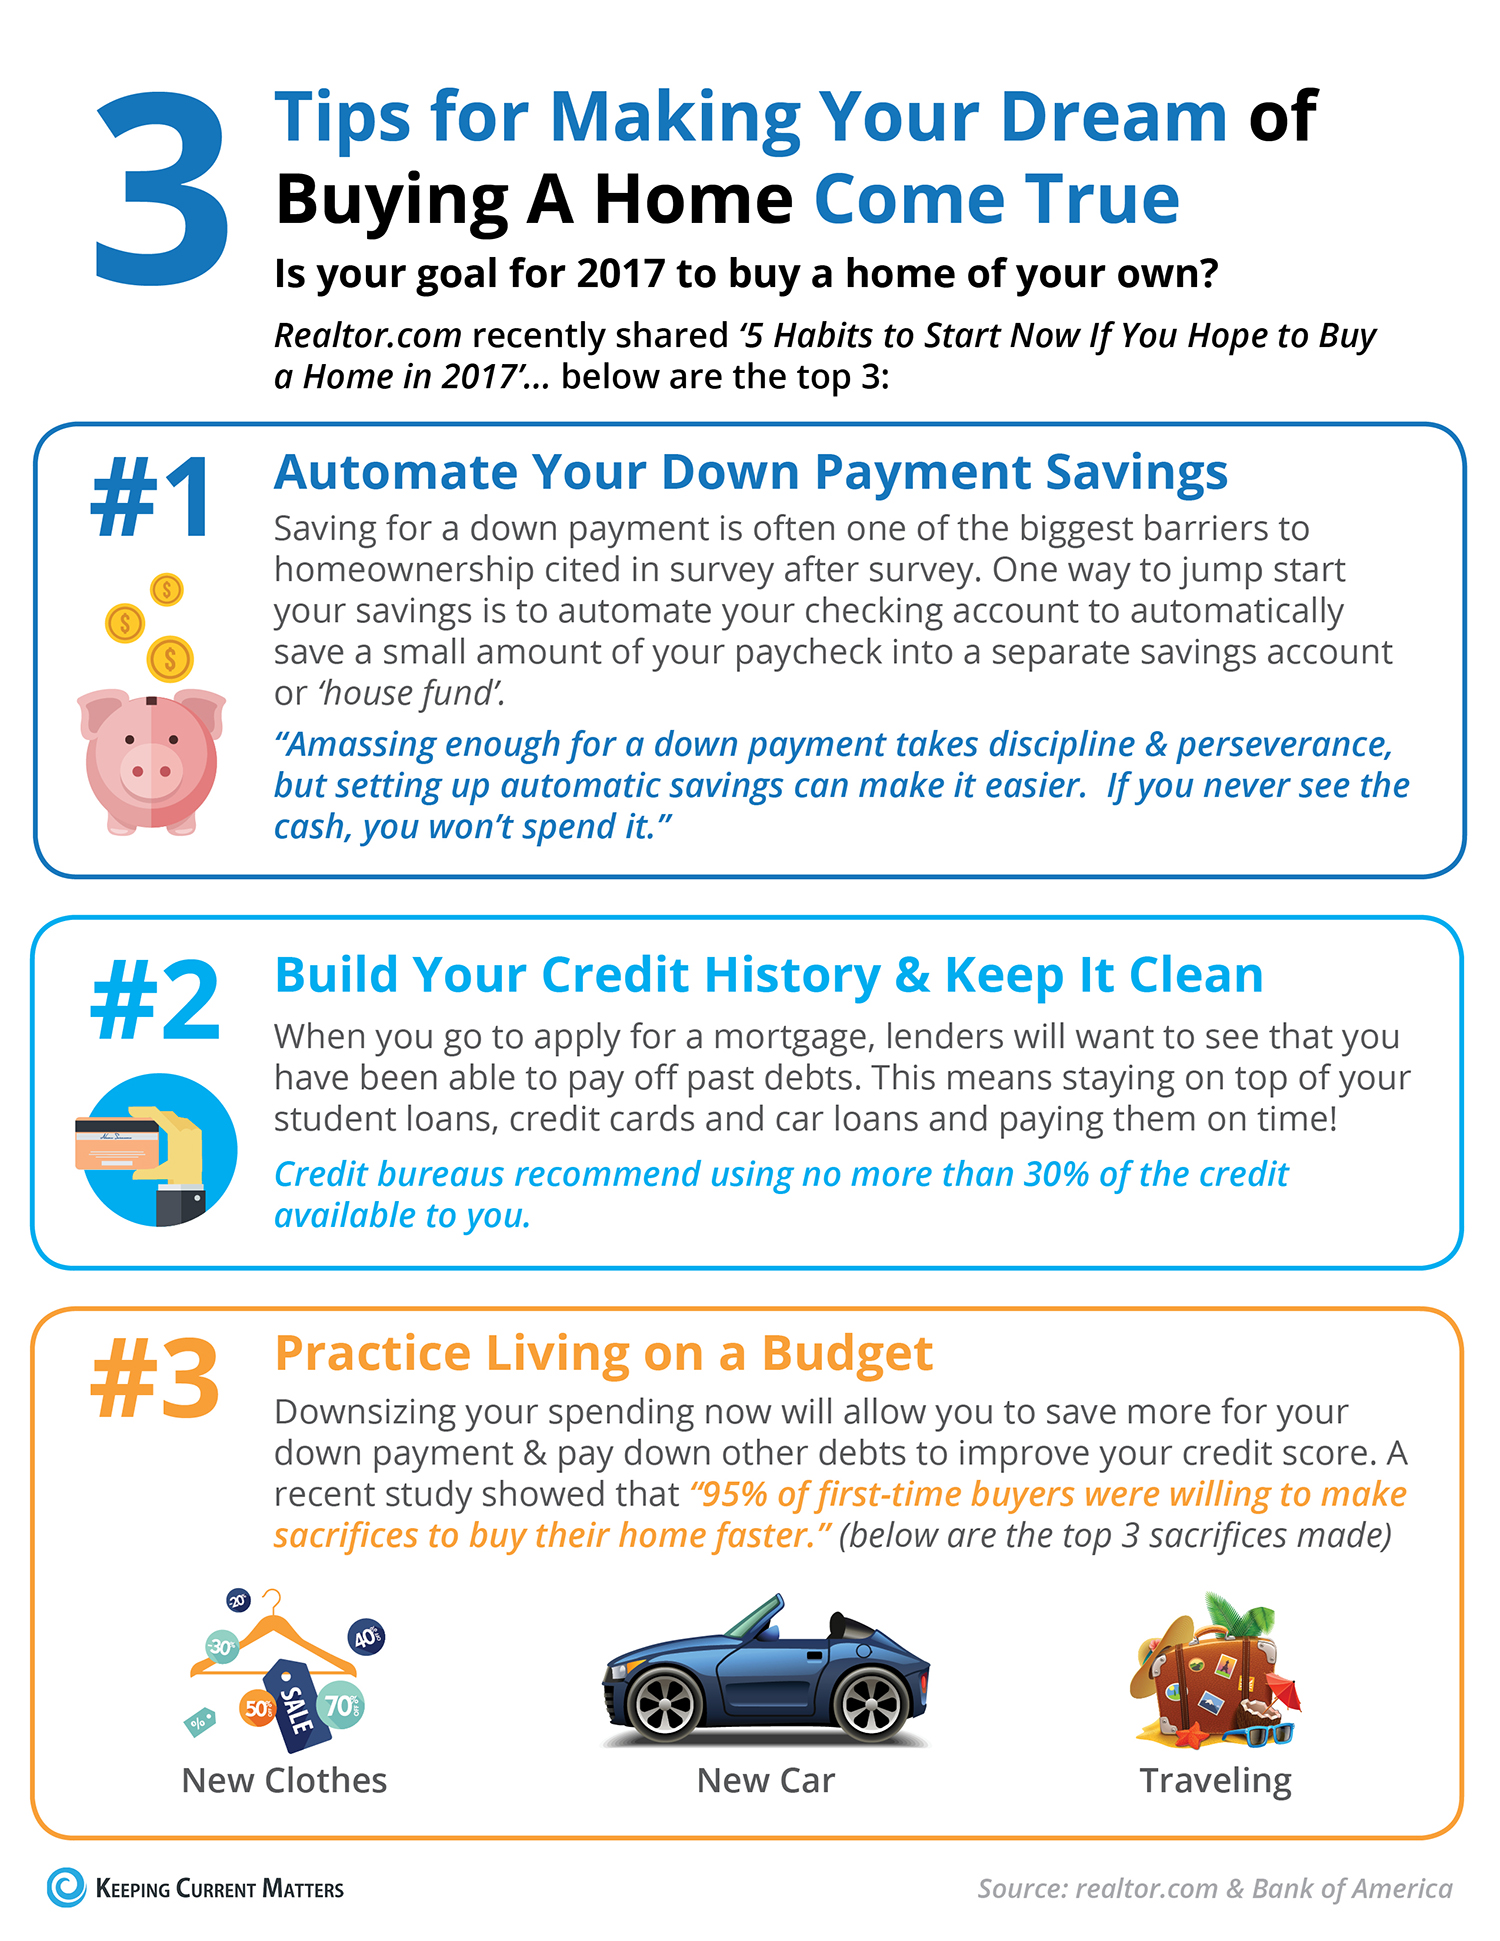 3 Tips for Making Your Dream of Buying a Home Come True [INFOGRAPHIC] | Keeping Current Matters